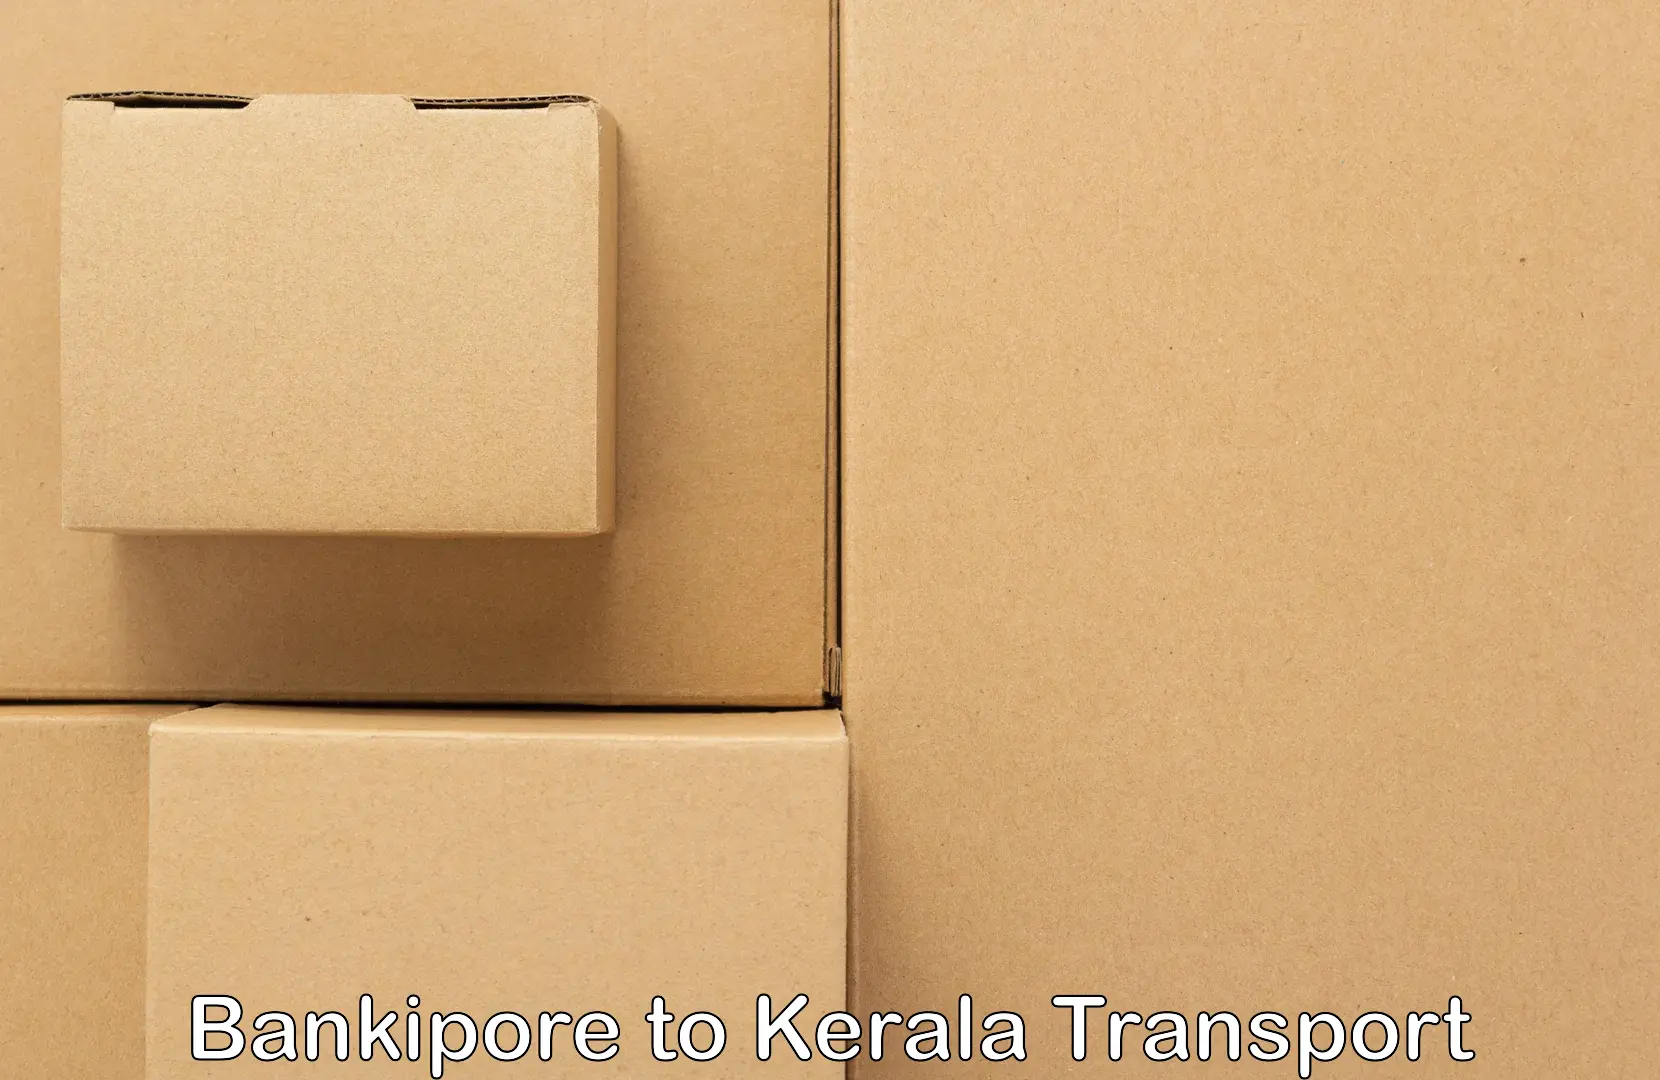 Cargo train transport services Bankipore to Rajamudy